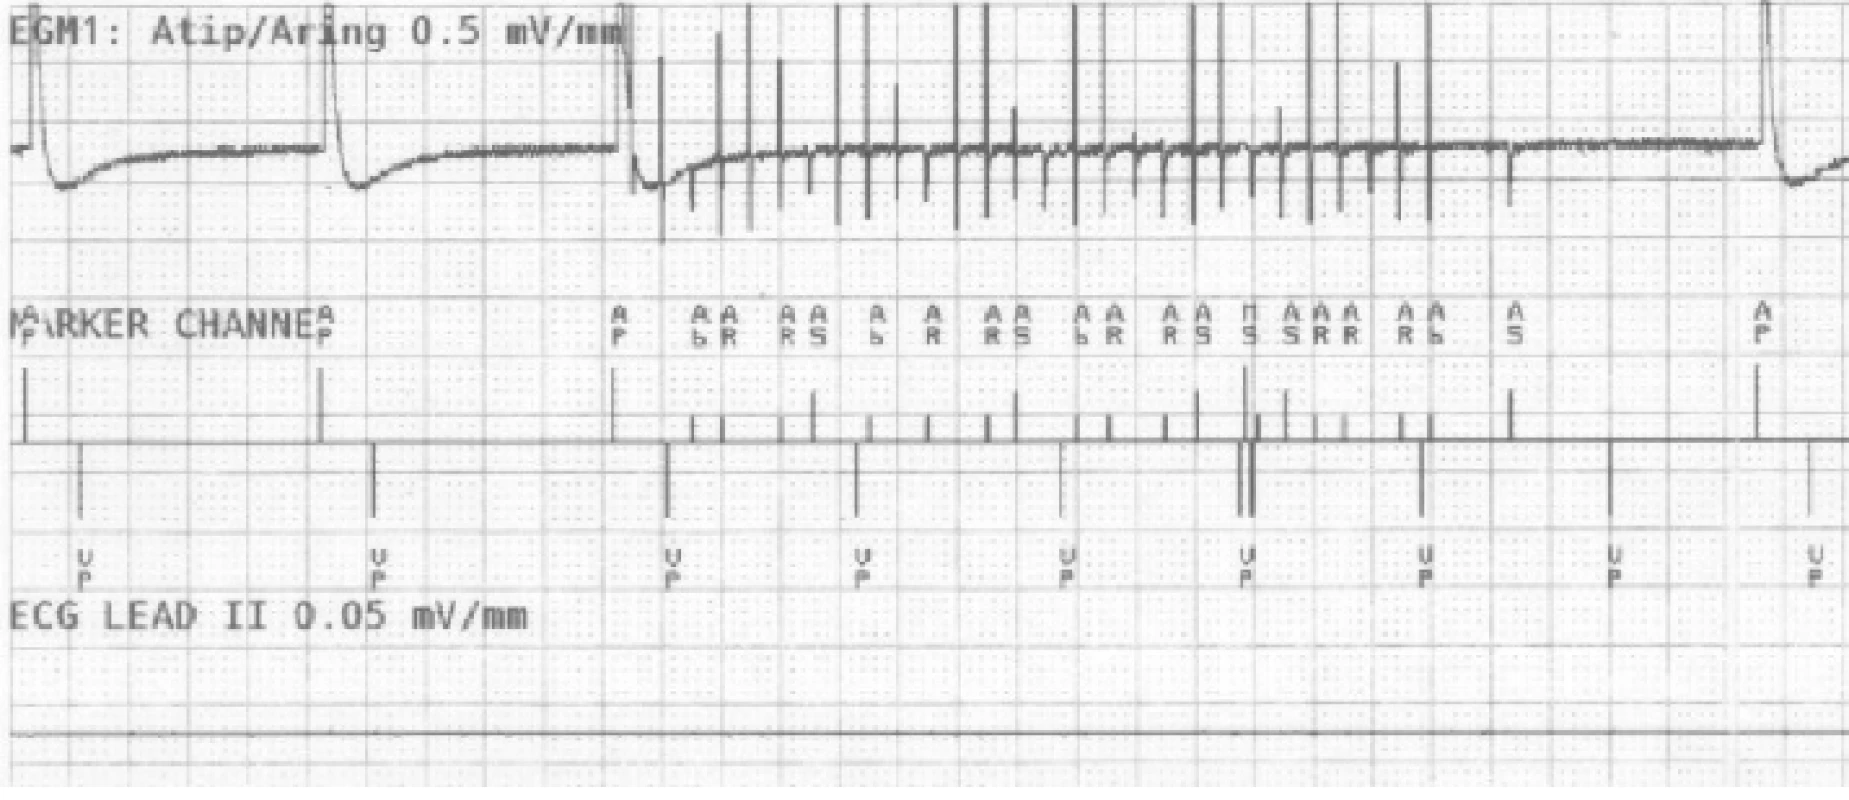 The recording of near-field channel of bipolar
atrial lead during EMI simulation detected as atrial
fibrillation. N.B.: Marker AP = Atrial Pace, AR/AB =
Atrial Refractory/Blanking, VP = Ventricular Pace,
MS = Mode Switching.